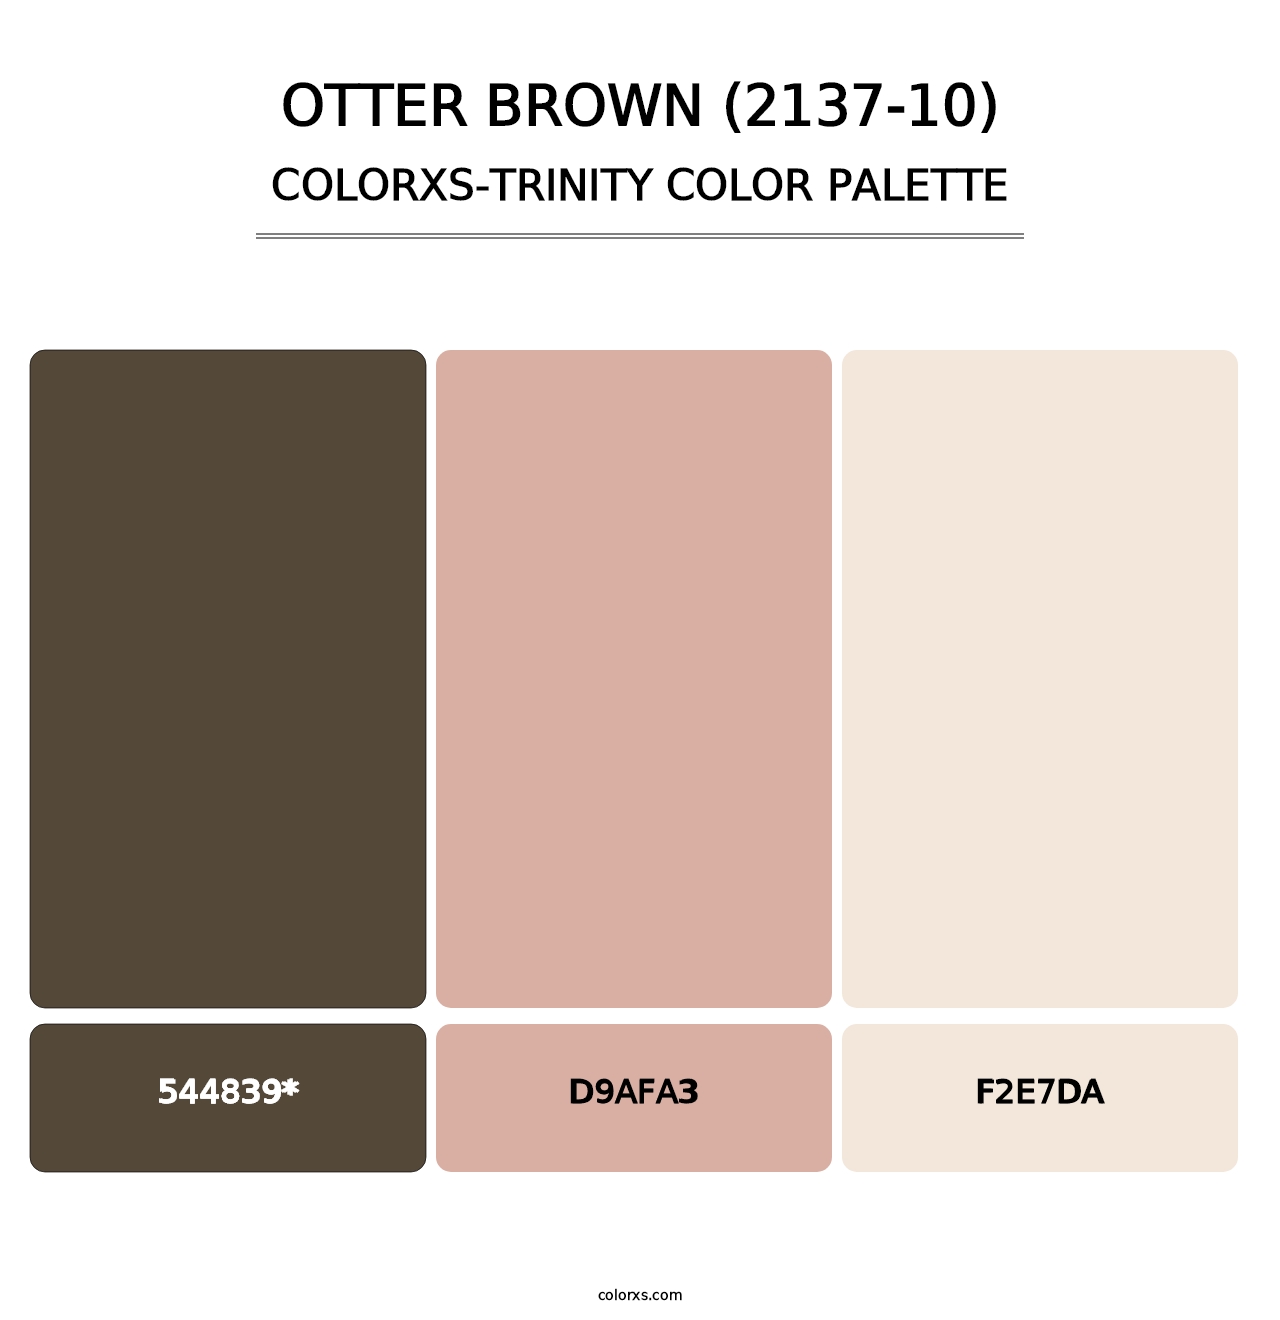 Otter Brown (2137-10) - Colorxs Trinity Palette